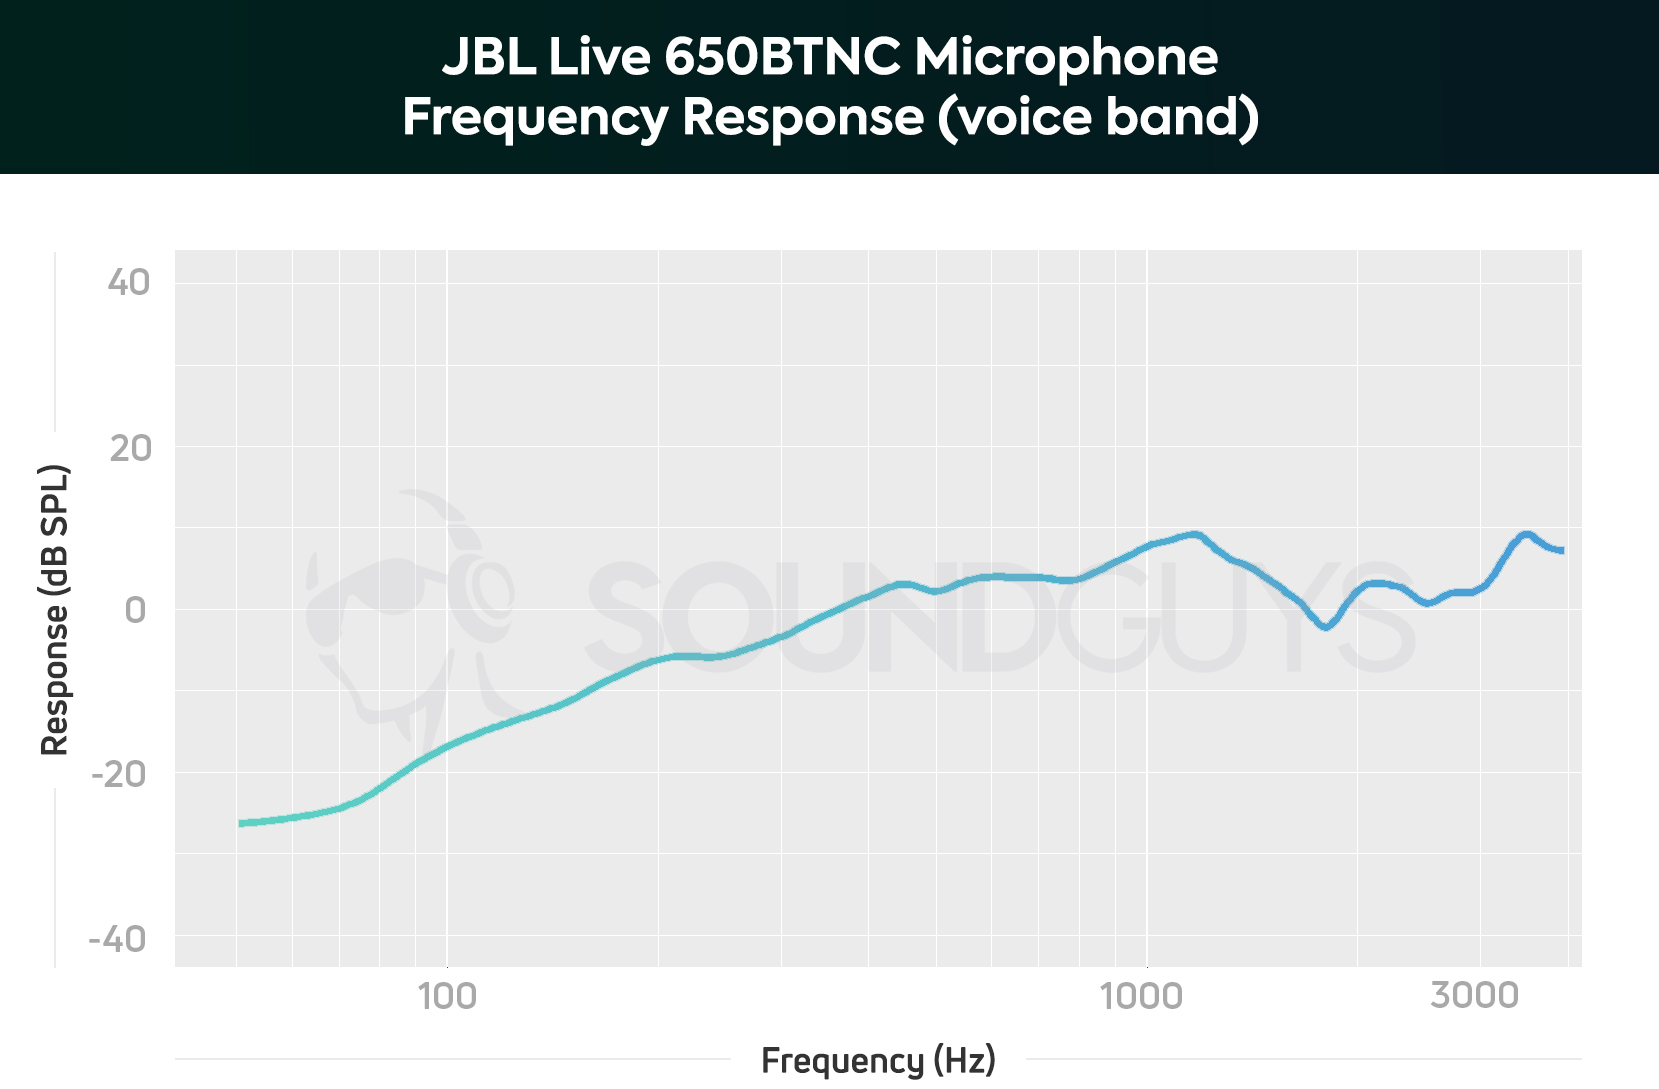 JBL Live 650BTNC frequency response chart for the microphone voice band.